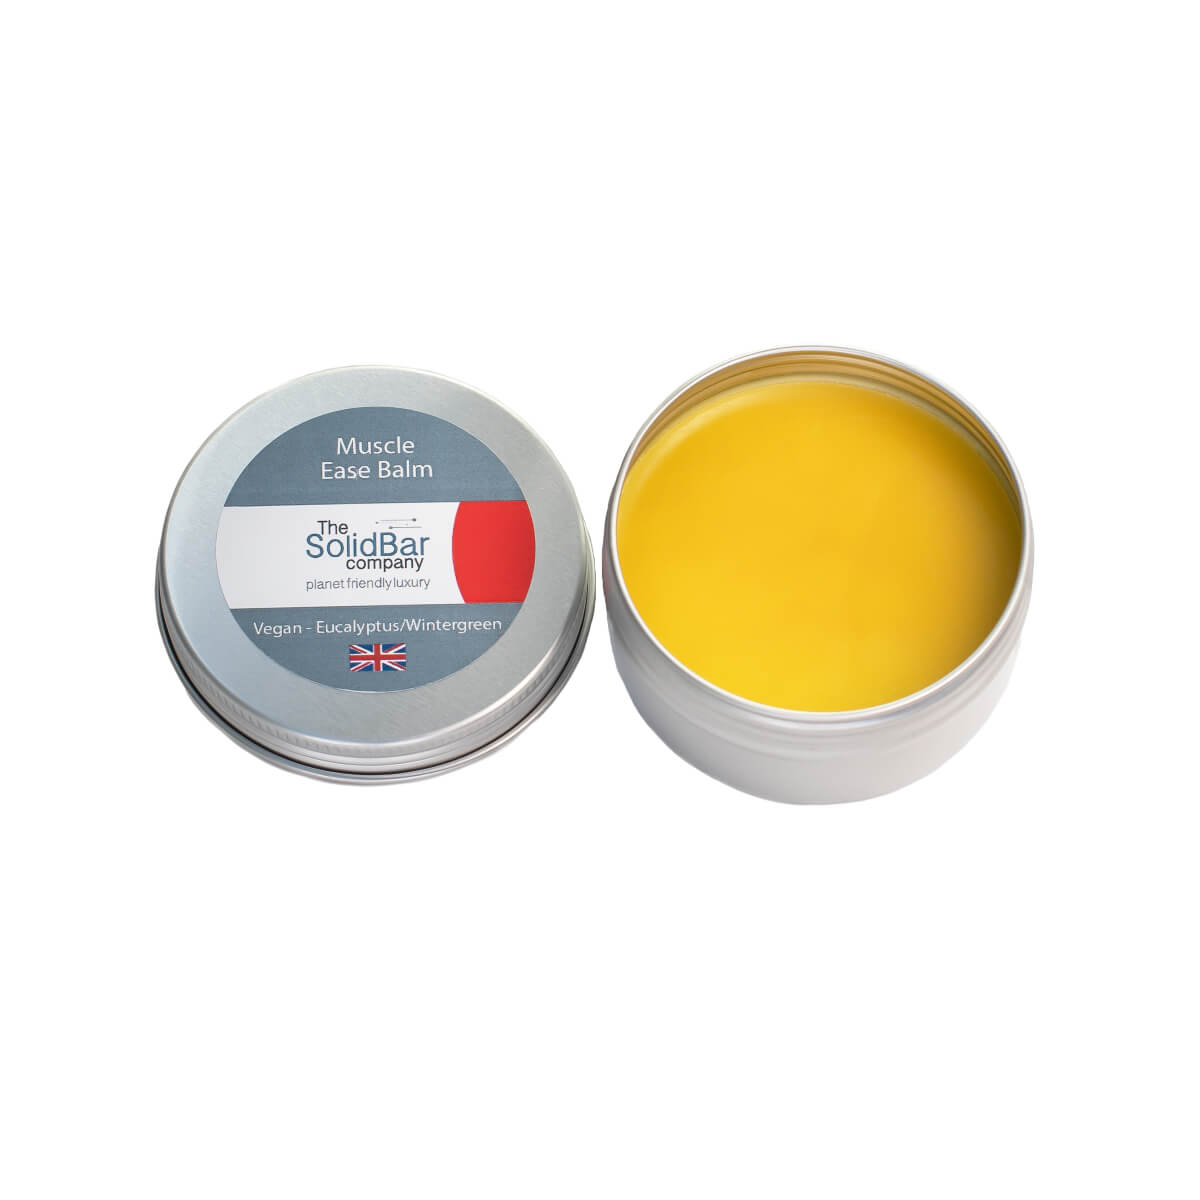 Muscle Ease Balm plus the new label